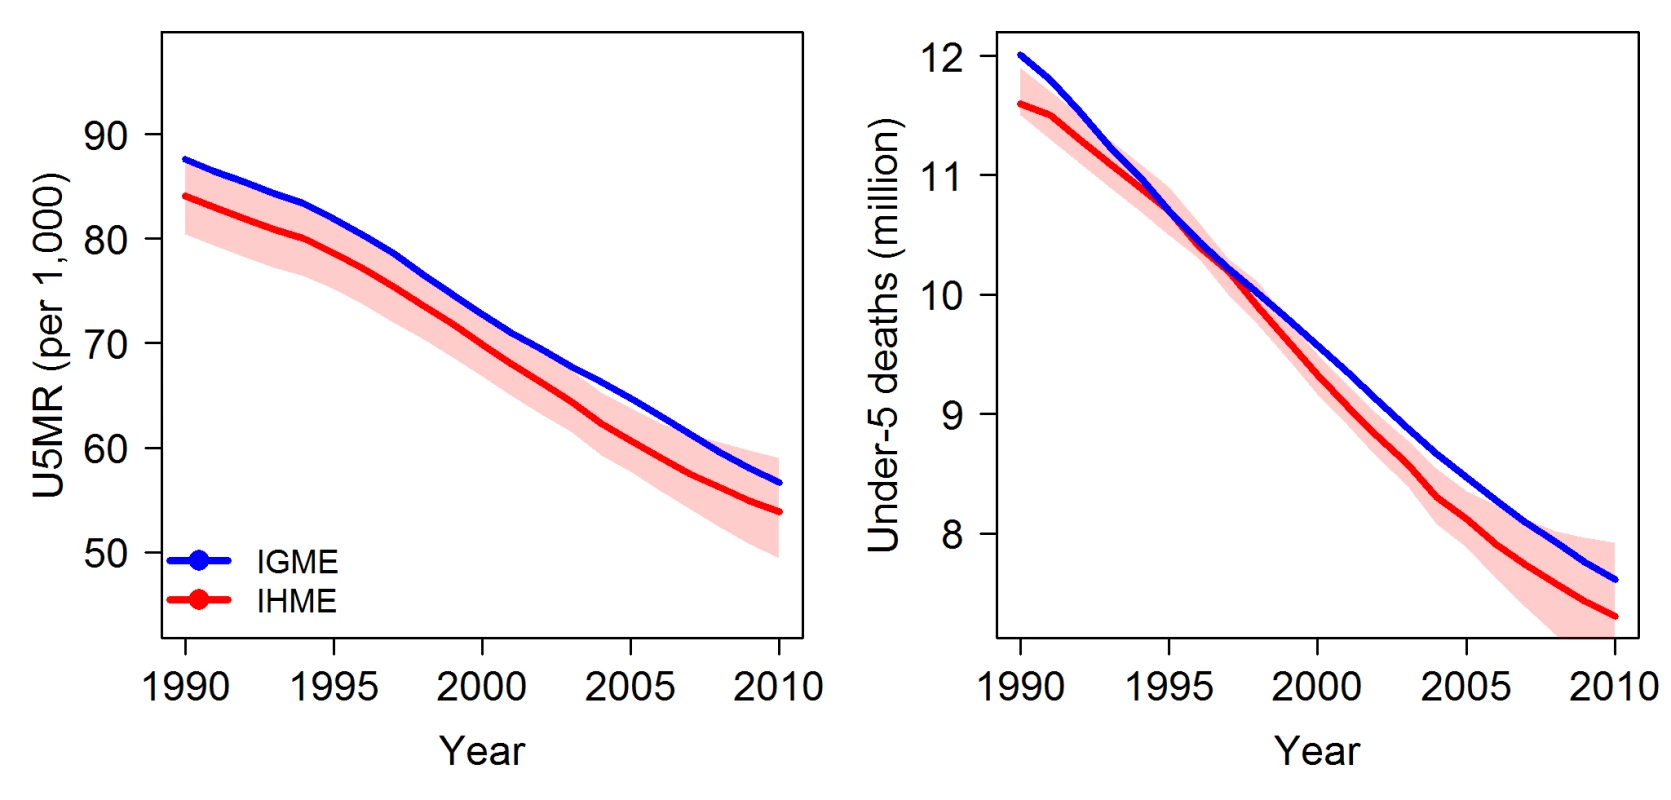 Comparison of global estimates of the U5MR and the number of under-five deaths, from 1990 to 2010.